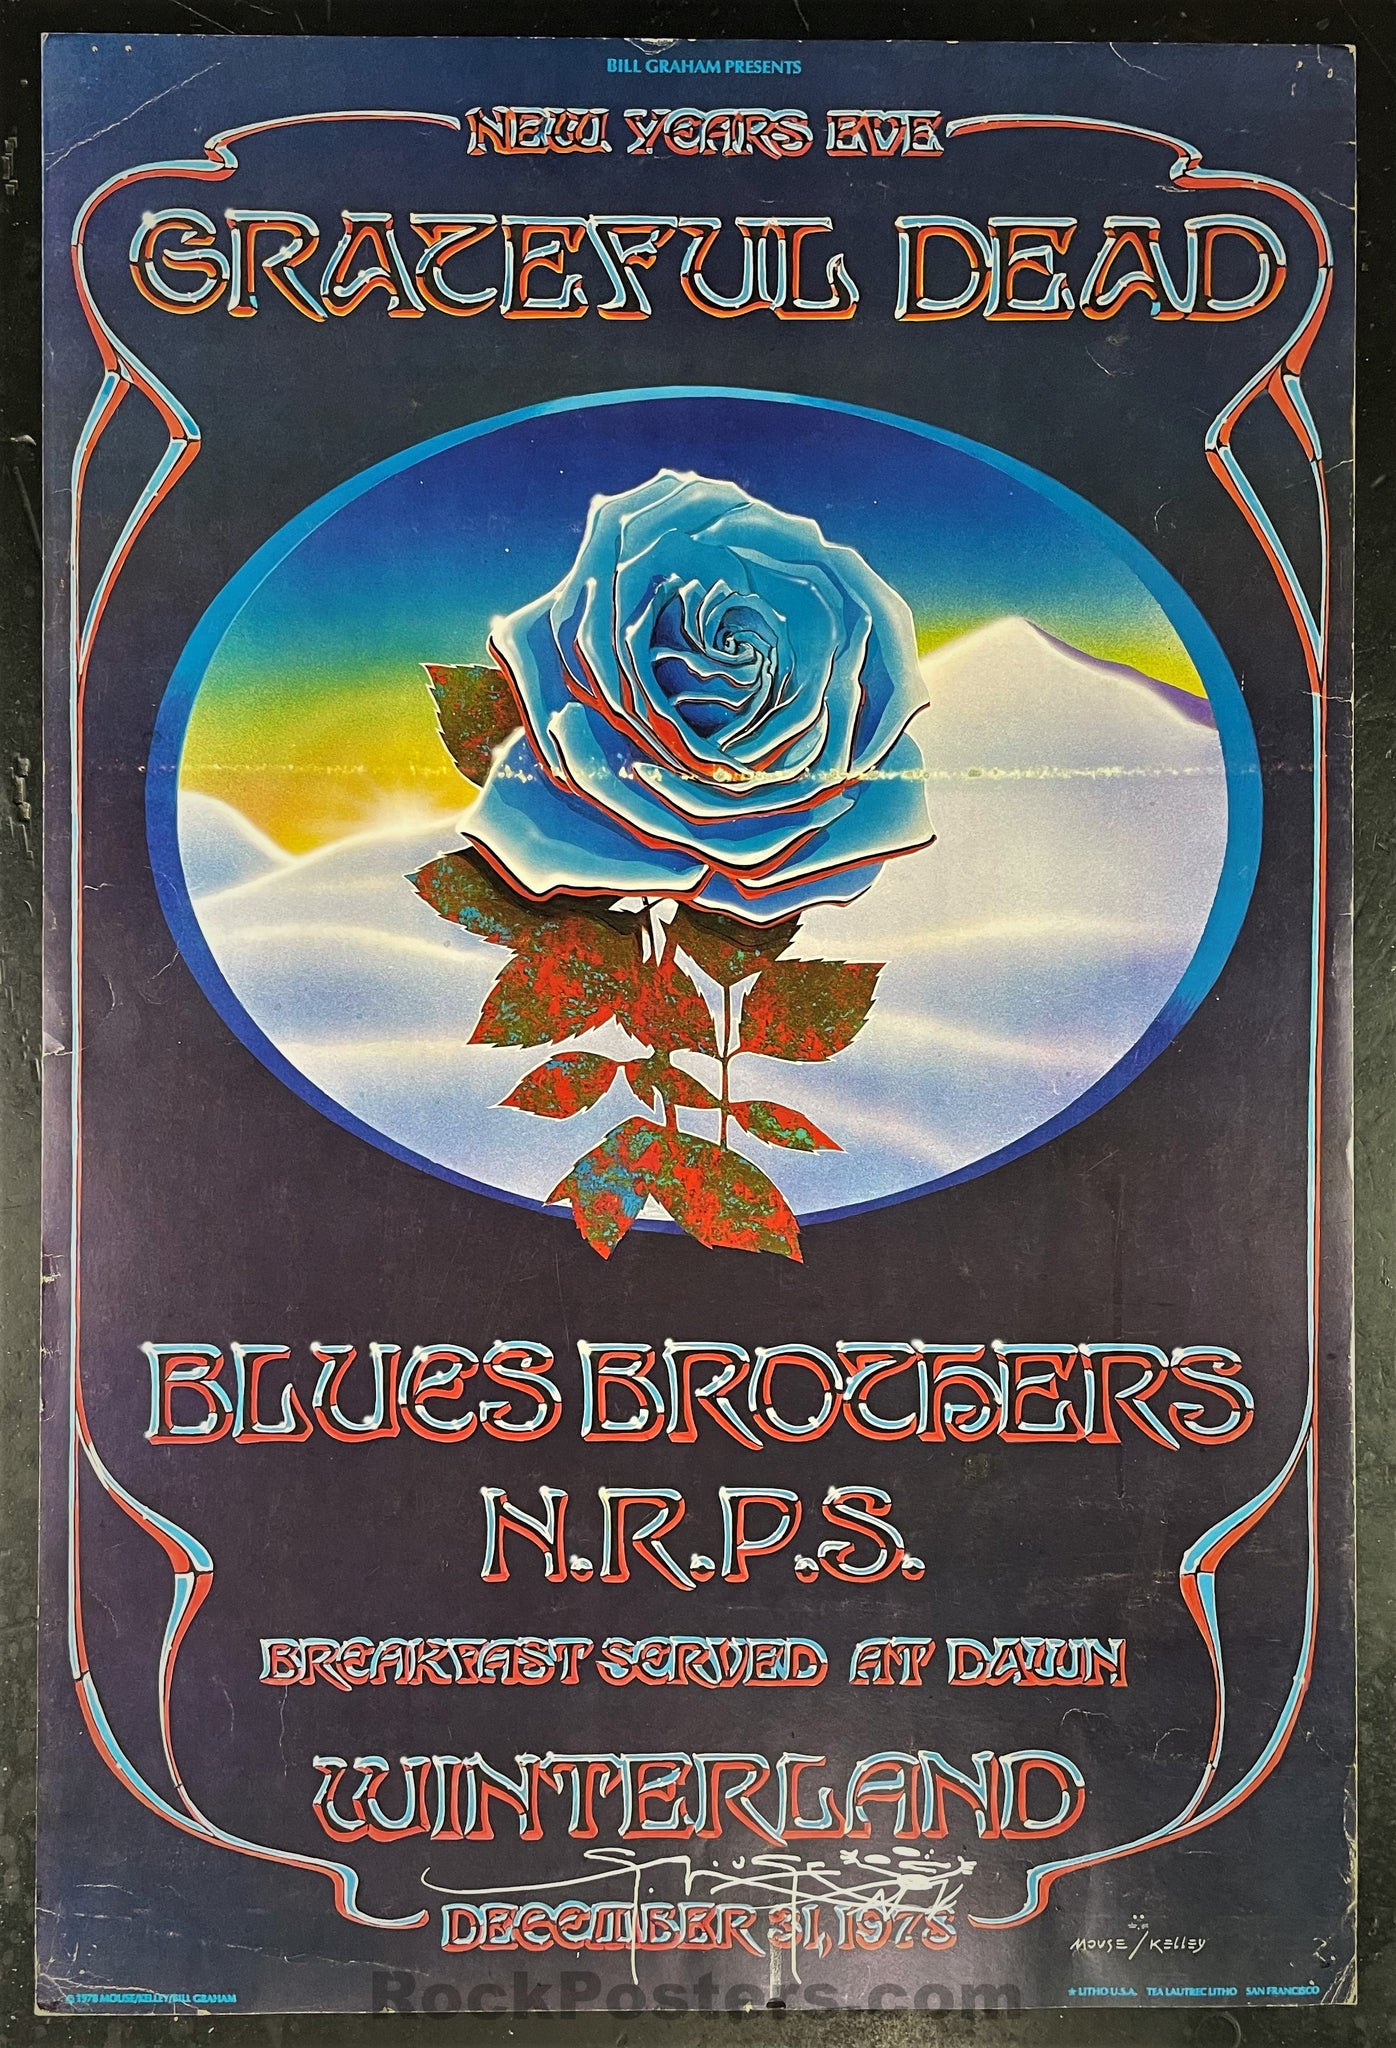 Cross Road Blues  Poster for Sale by Daxingian